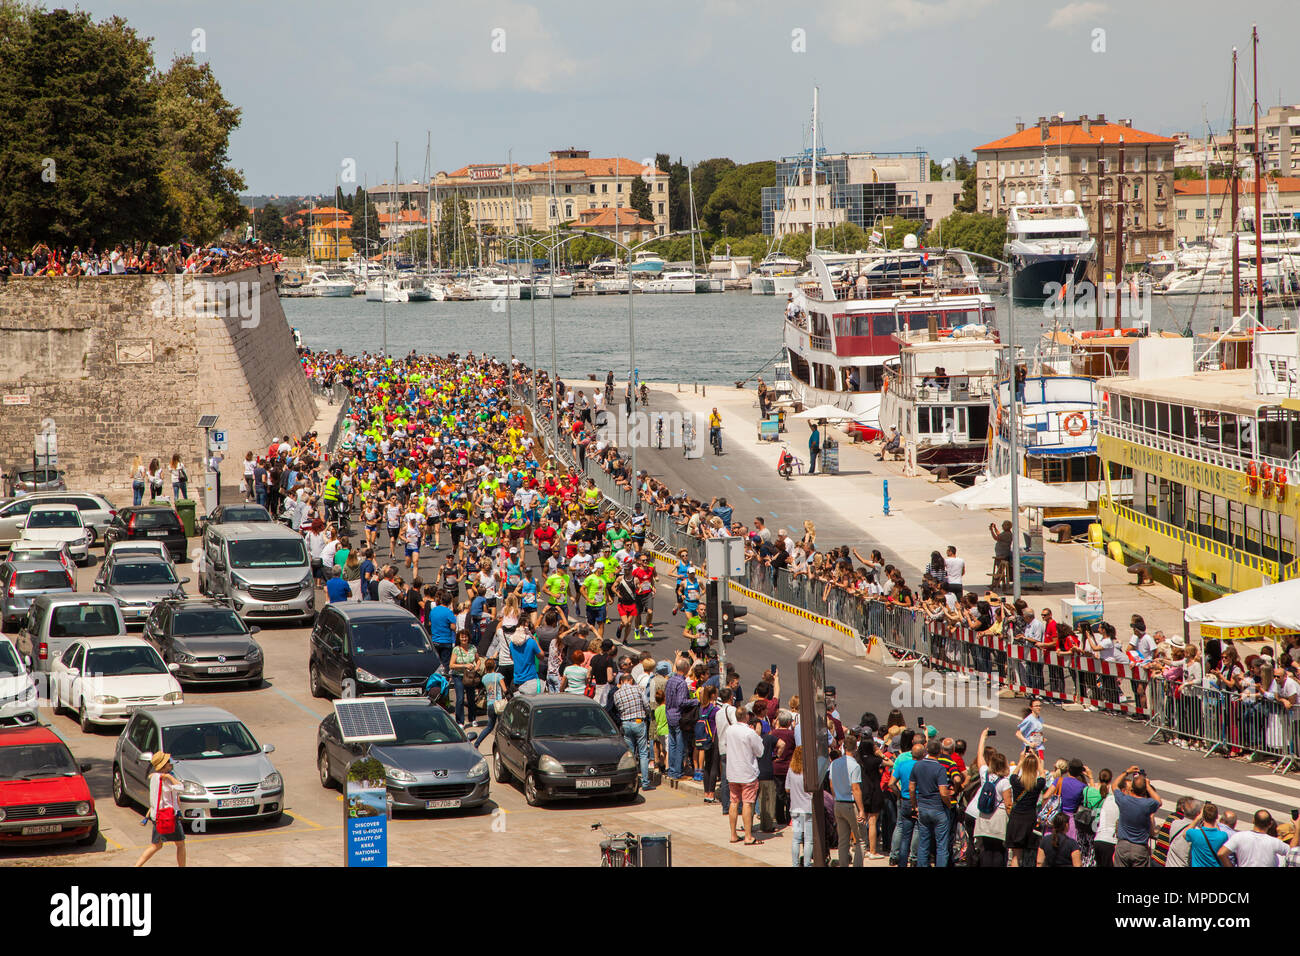 Competitors athletes  and runners  in Zadar Croatia taking part in the global race wings for life world  charity run  in aid of spinal research Stock Photo